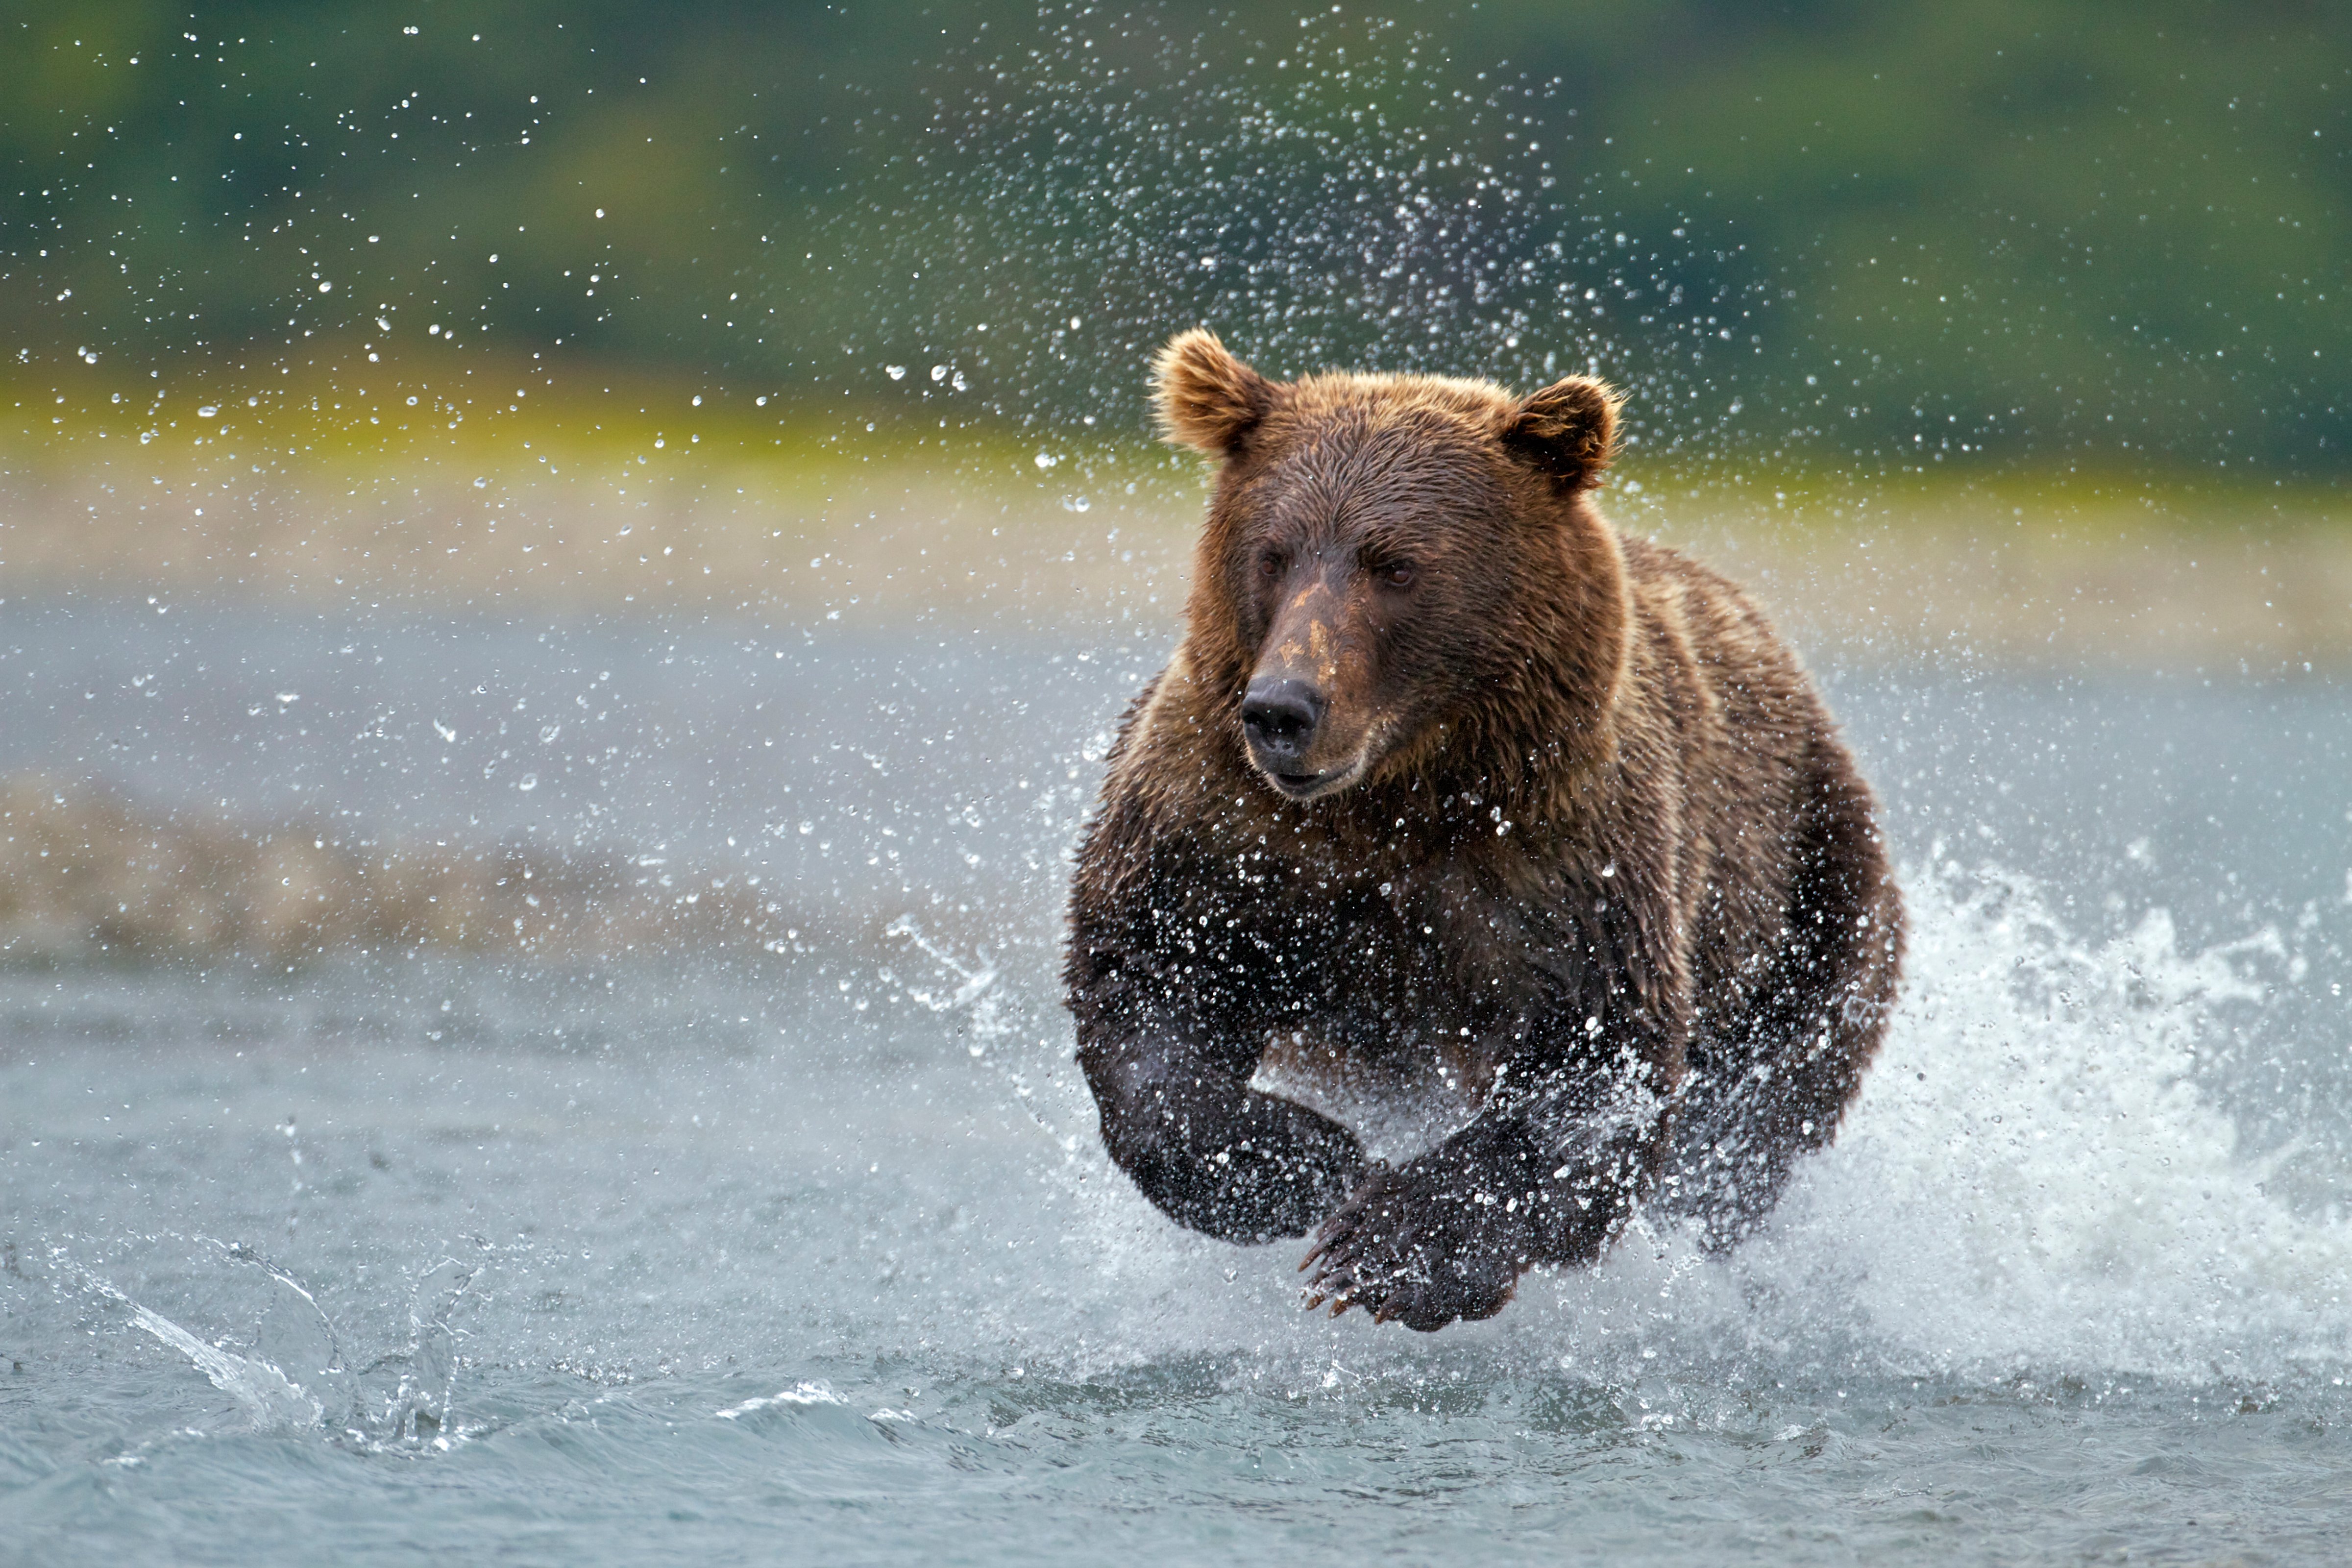 A brown Bear is pictured at sunrise catching a salmon at Mount Kukak on August 28, 2011 in Katmai National Park, Alaska. (Jon Cornforth—Barcroft Media/Getty Images)